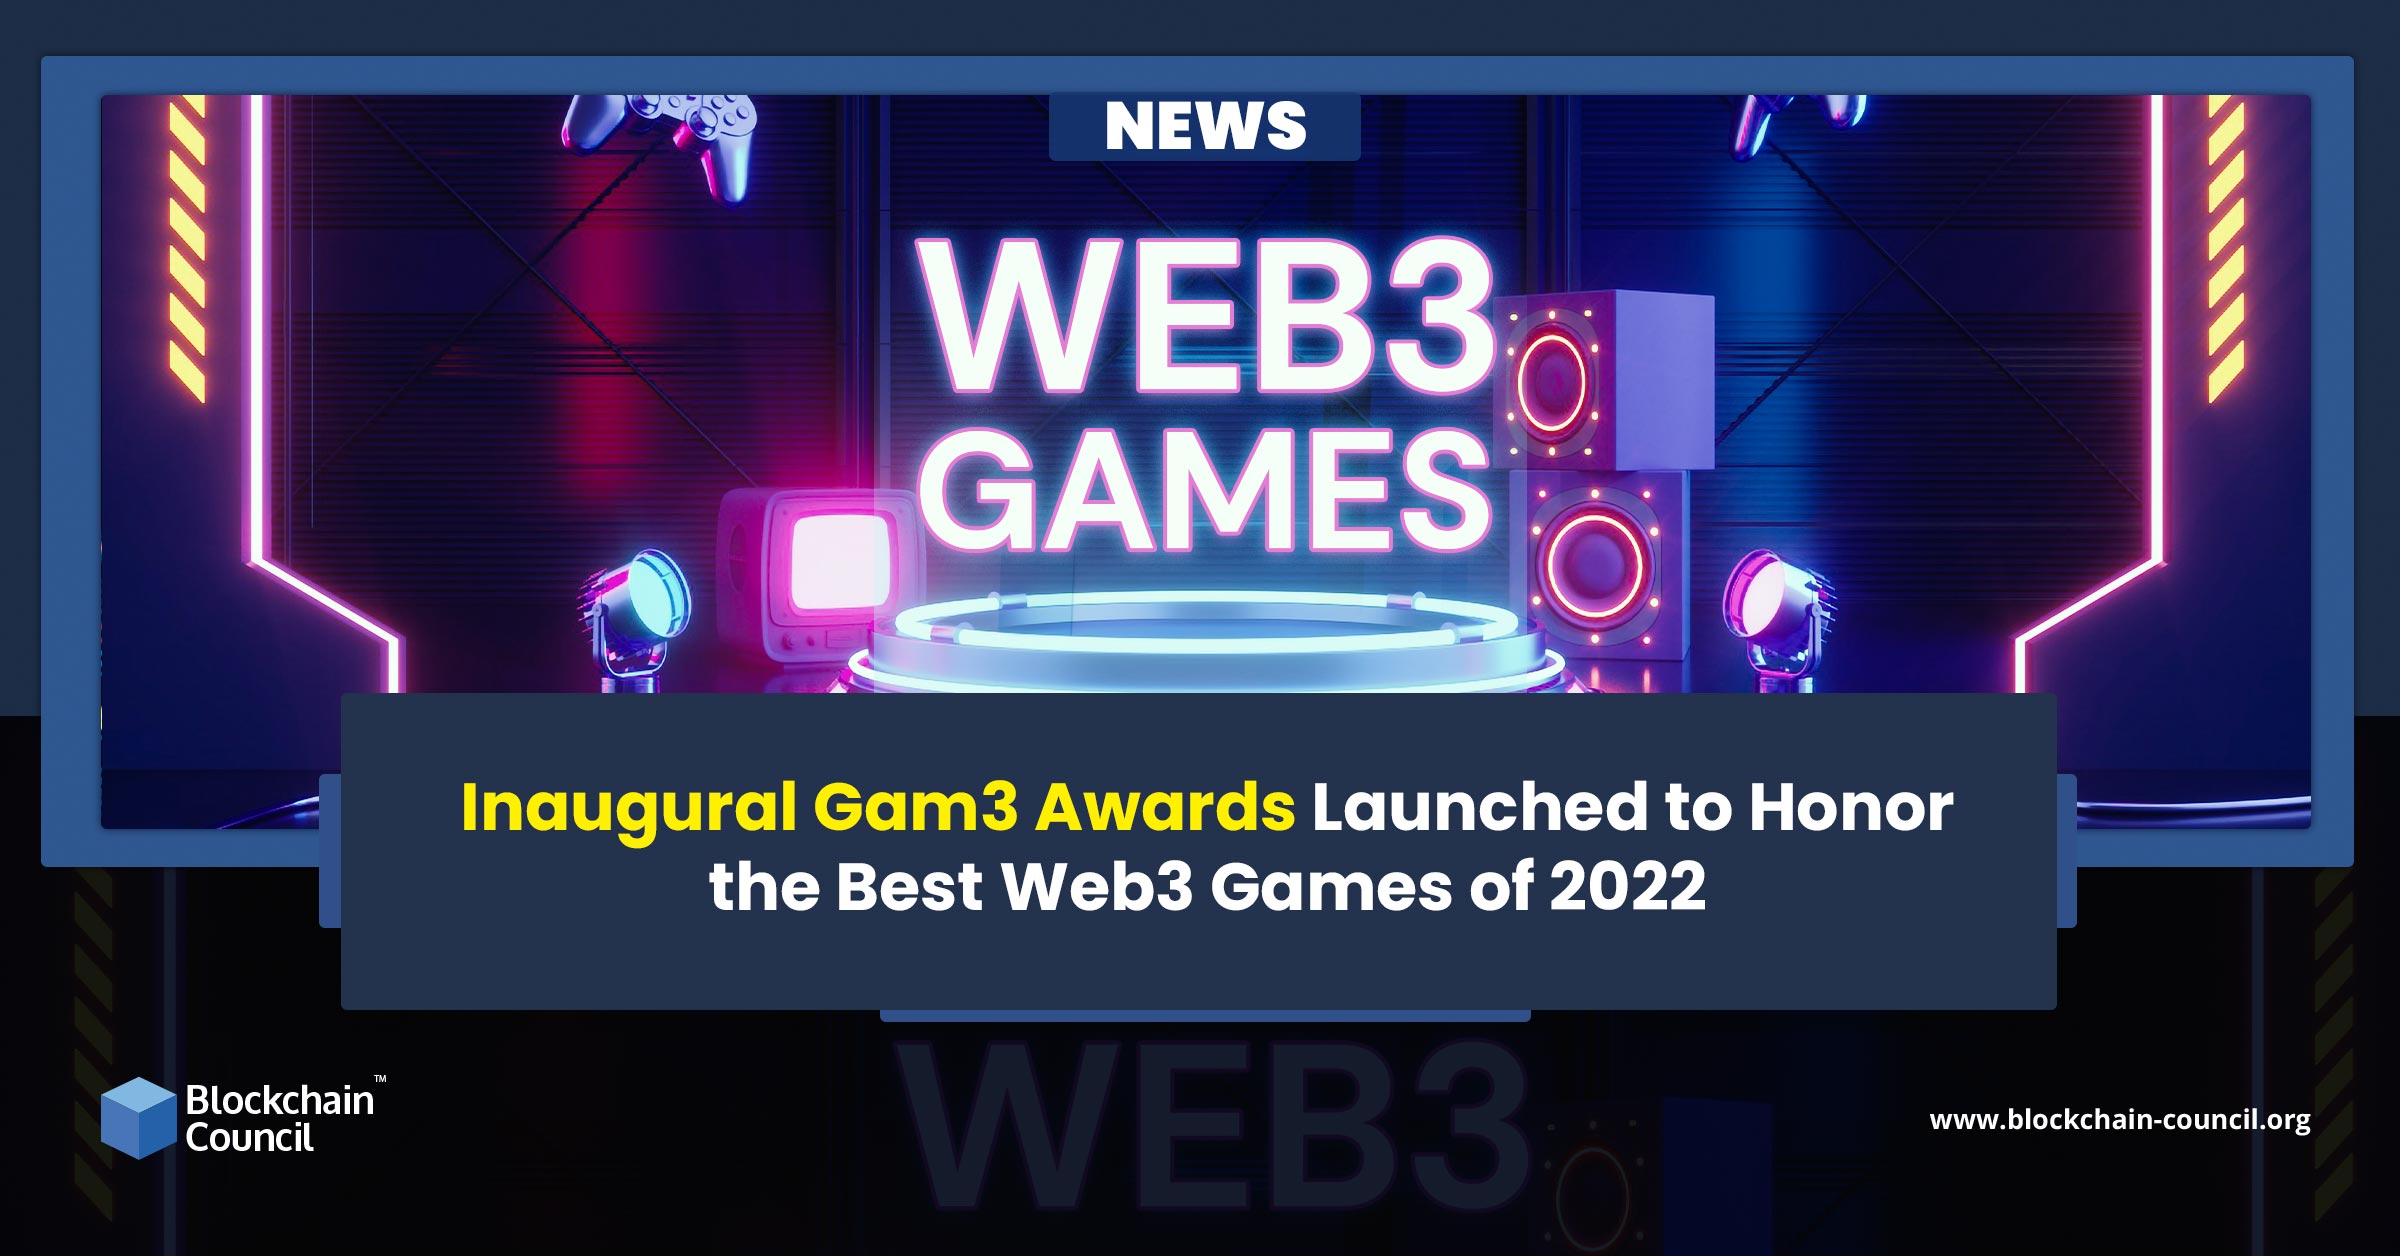 Inaugural Gam3 Awards Launched to Honor the Best Web3 Games of 2022